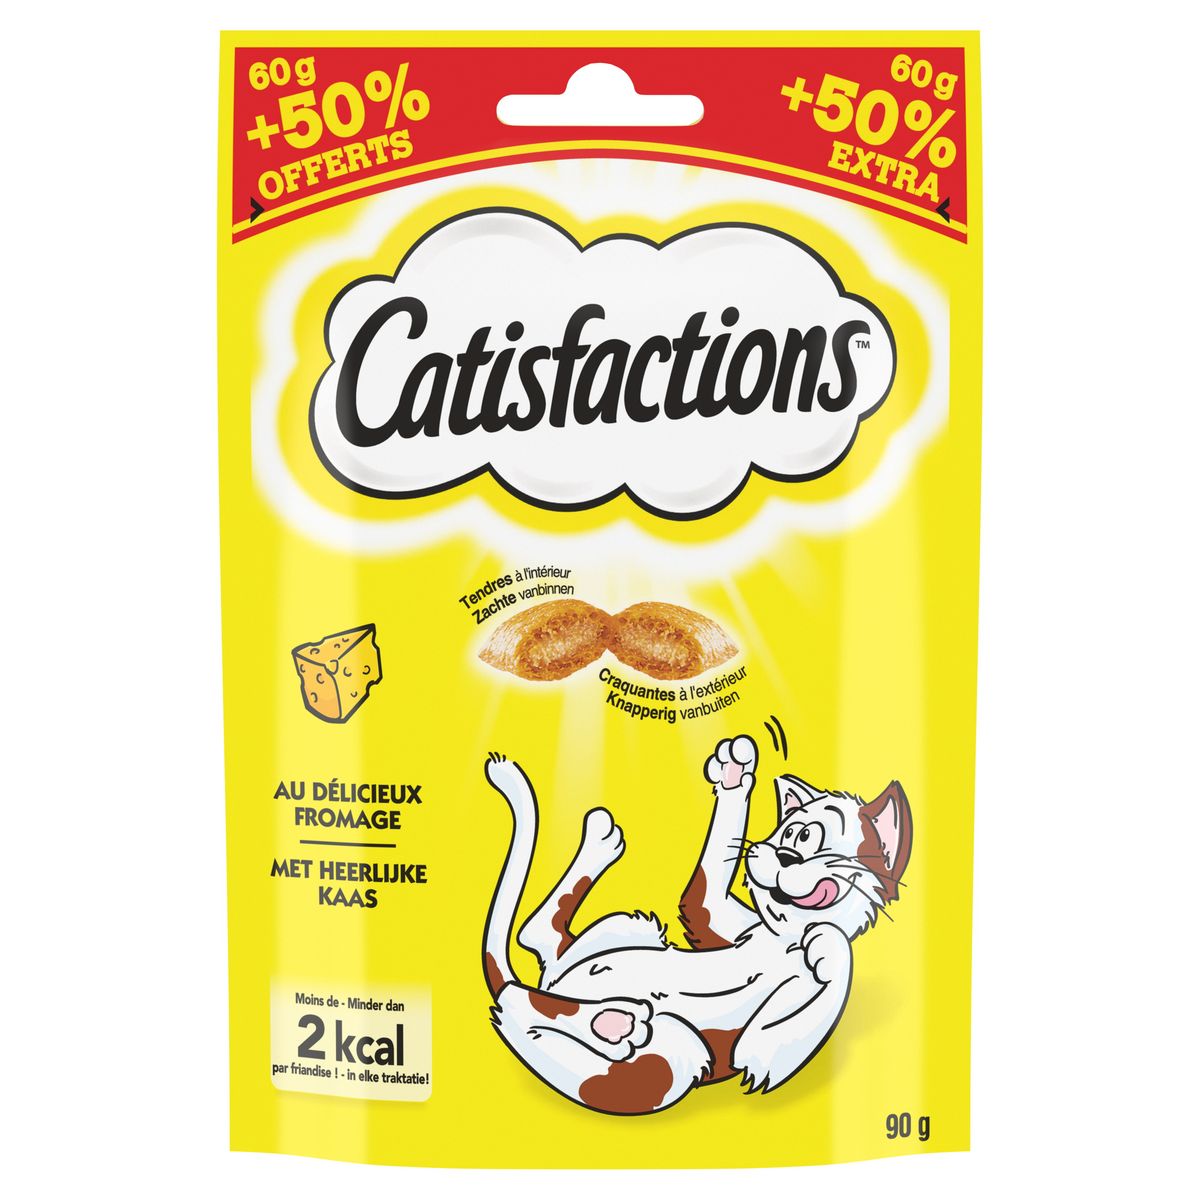 CATISFACTIONS Friandises au fromage pour chat 60g+50% offerts 90g